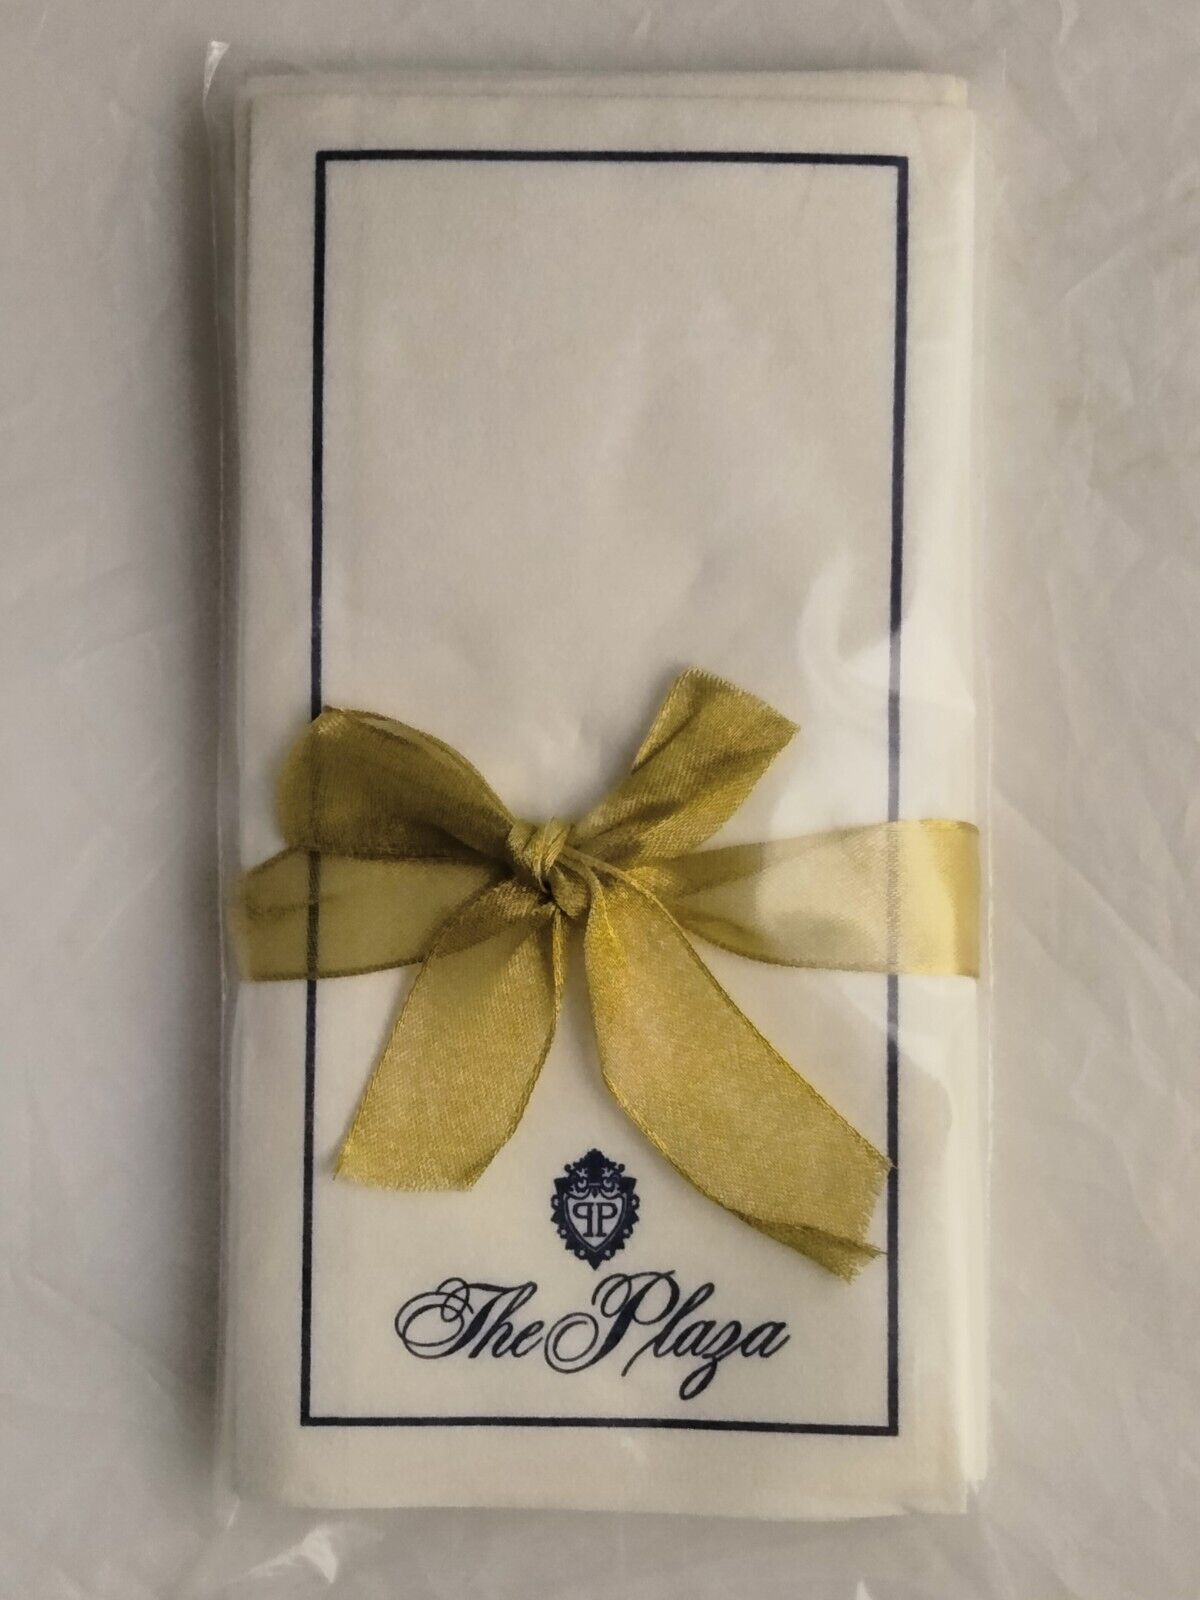 The Plaza Hotel New York City - Bundled Paper Napkin Set of 7 with Bow - Clean